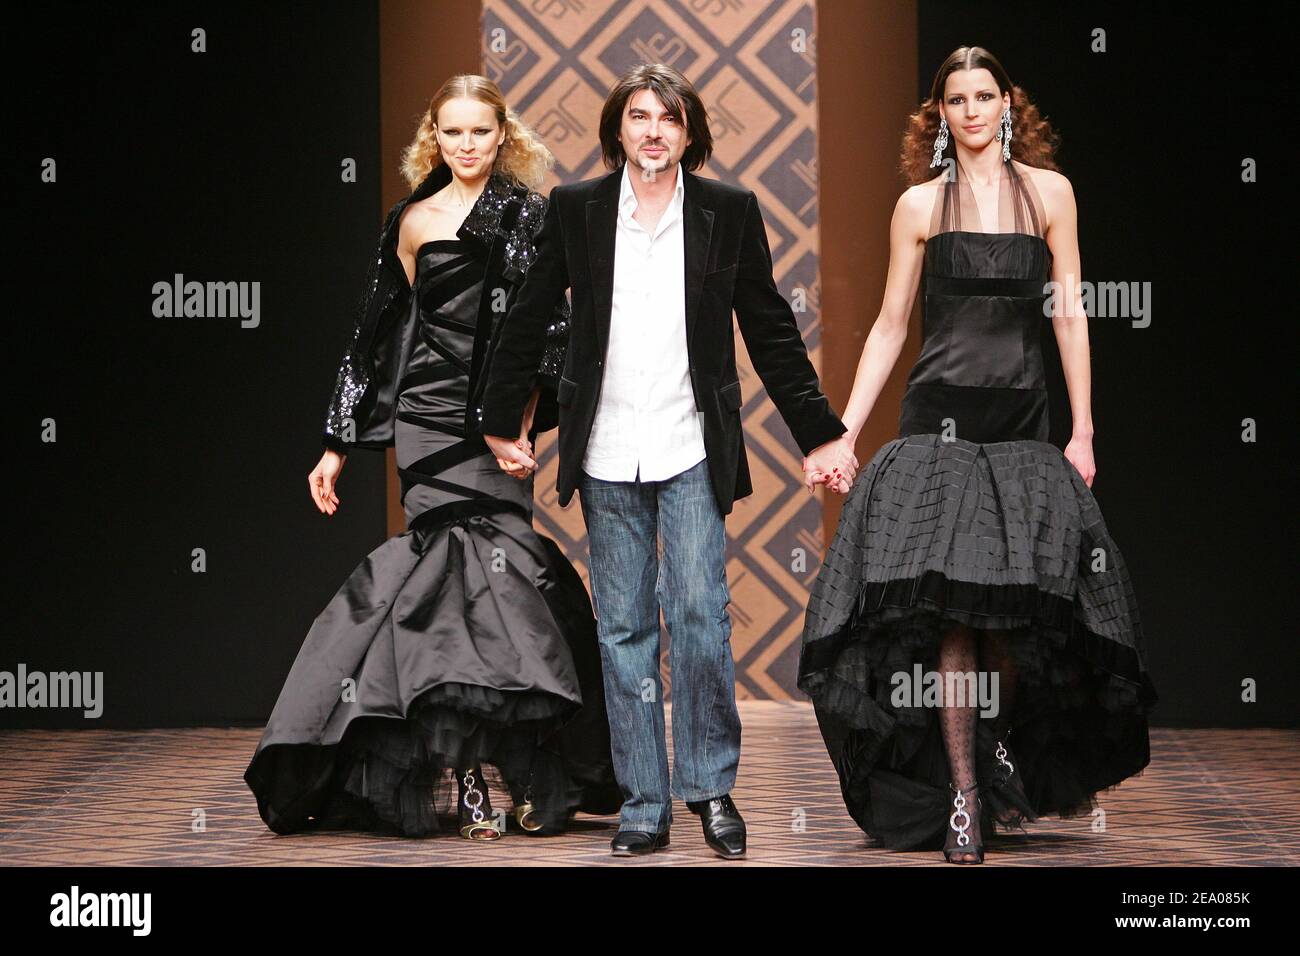 Flanked By Her Models High Resolution Stock Photography and Images - Alamy